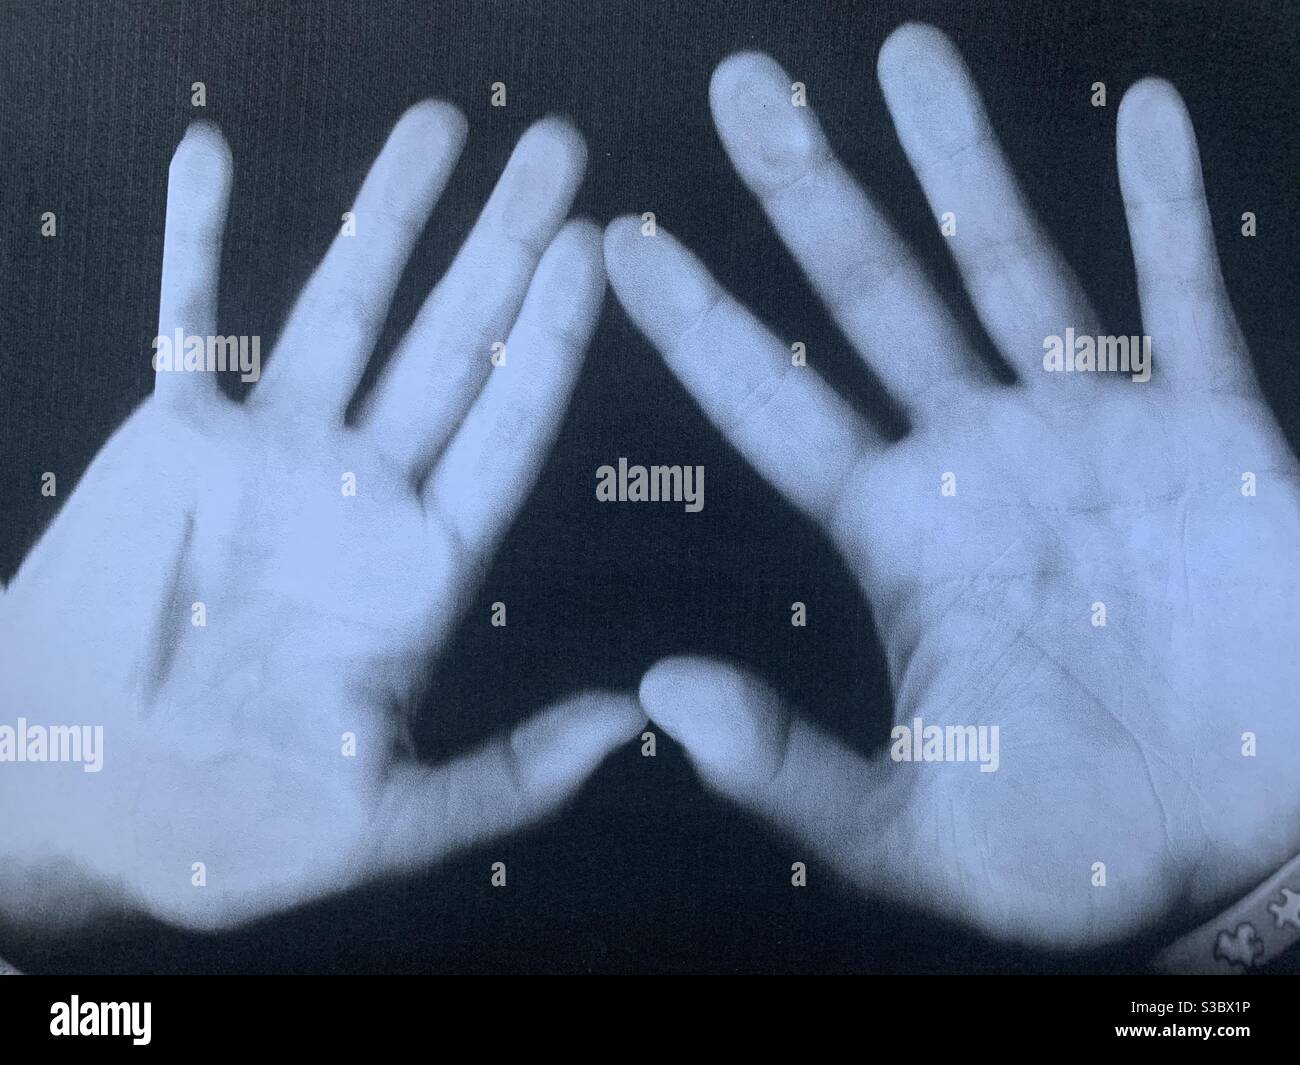 Hands photocopy - fingers spread and palms showing Stock Photo